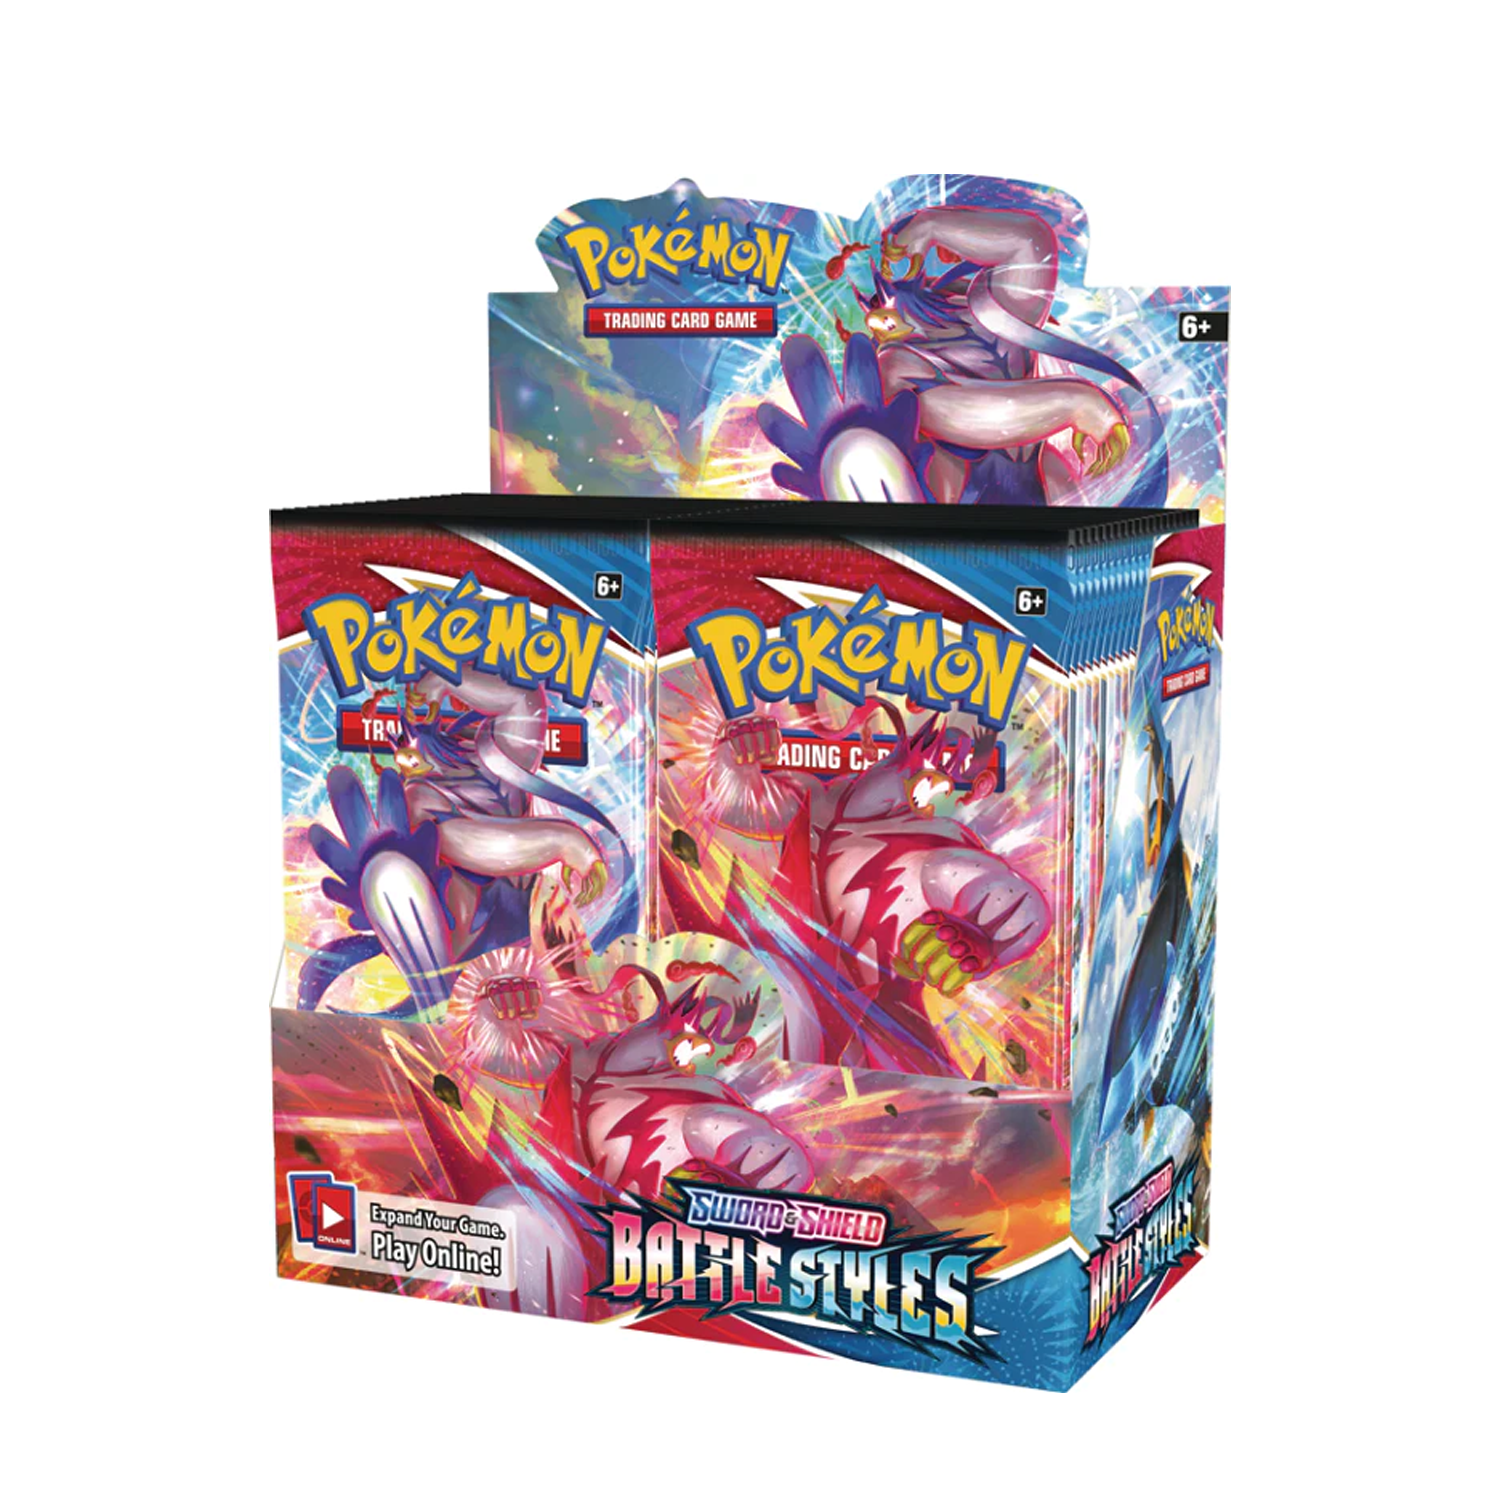 Pokemon Cards - Sword & Shield Battle Styles English Booster (1 Pack)